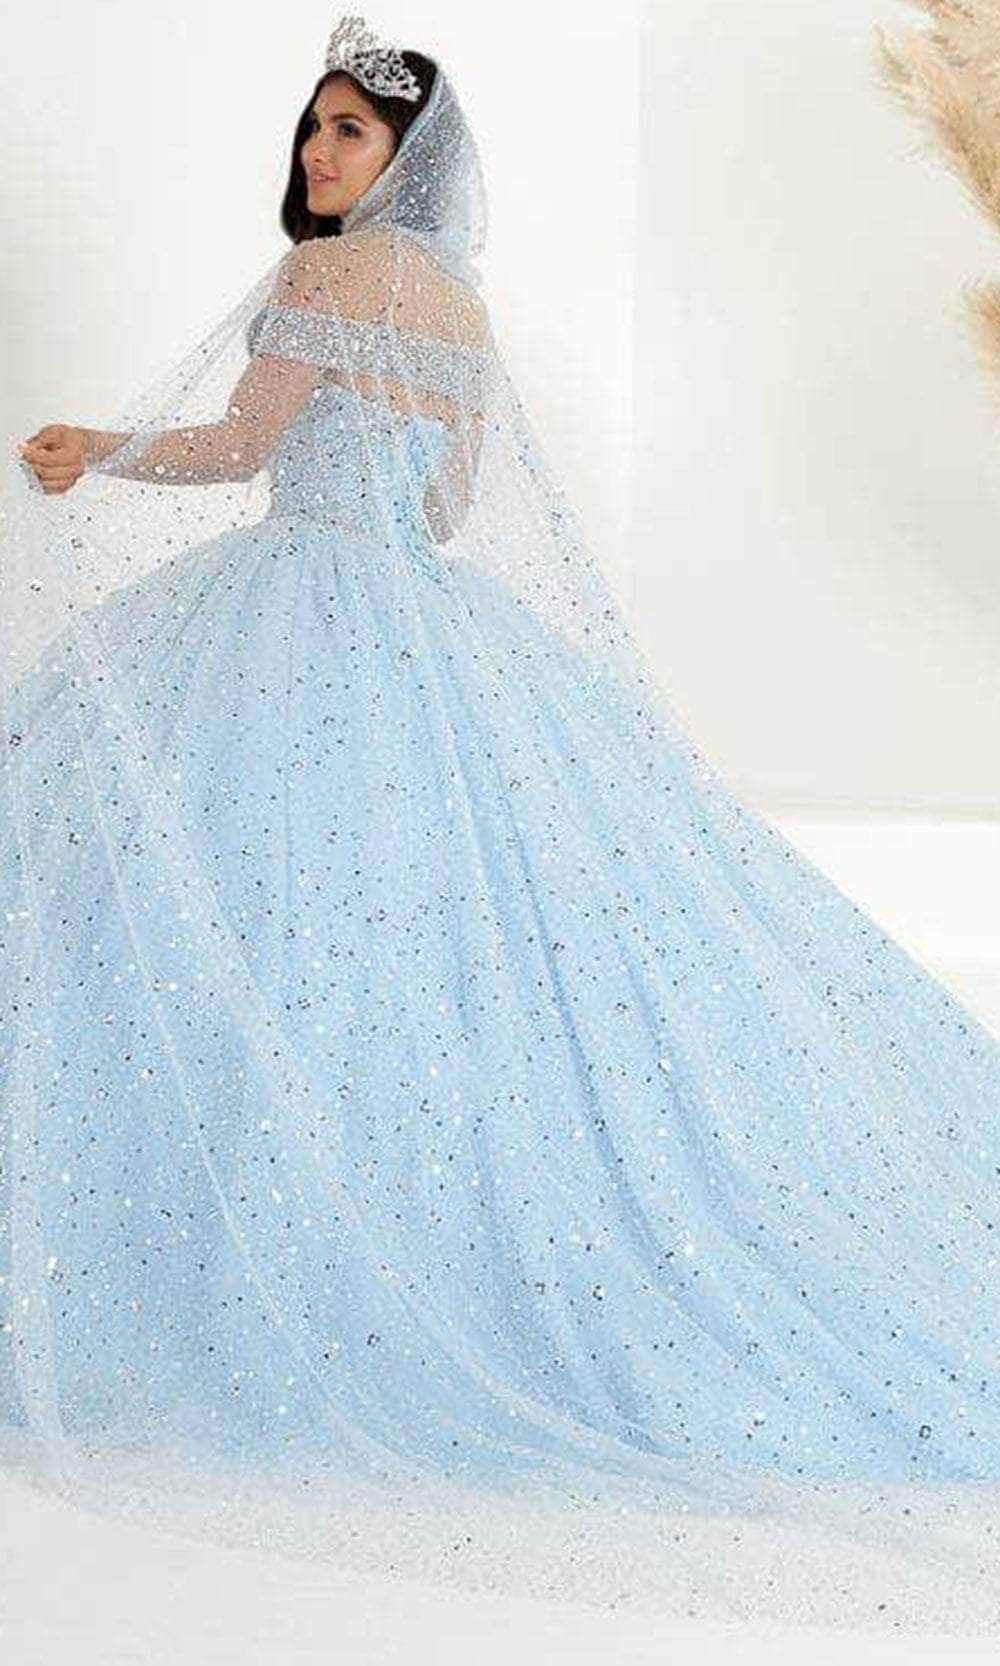 Fiesta Gowns 56452C - Beaded Off-shoulder Ballgown Special Occasion Dress